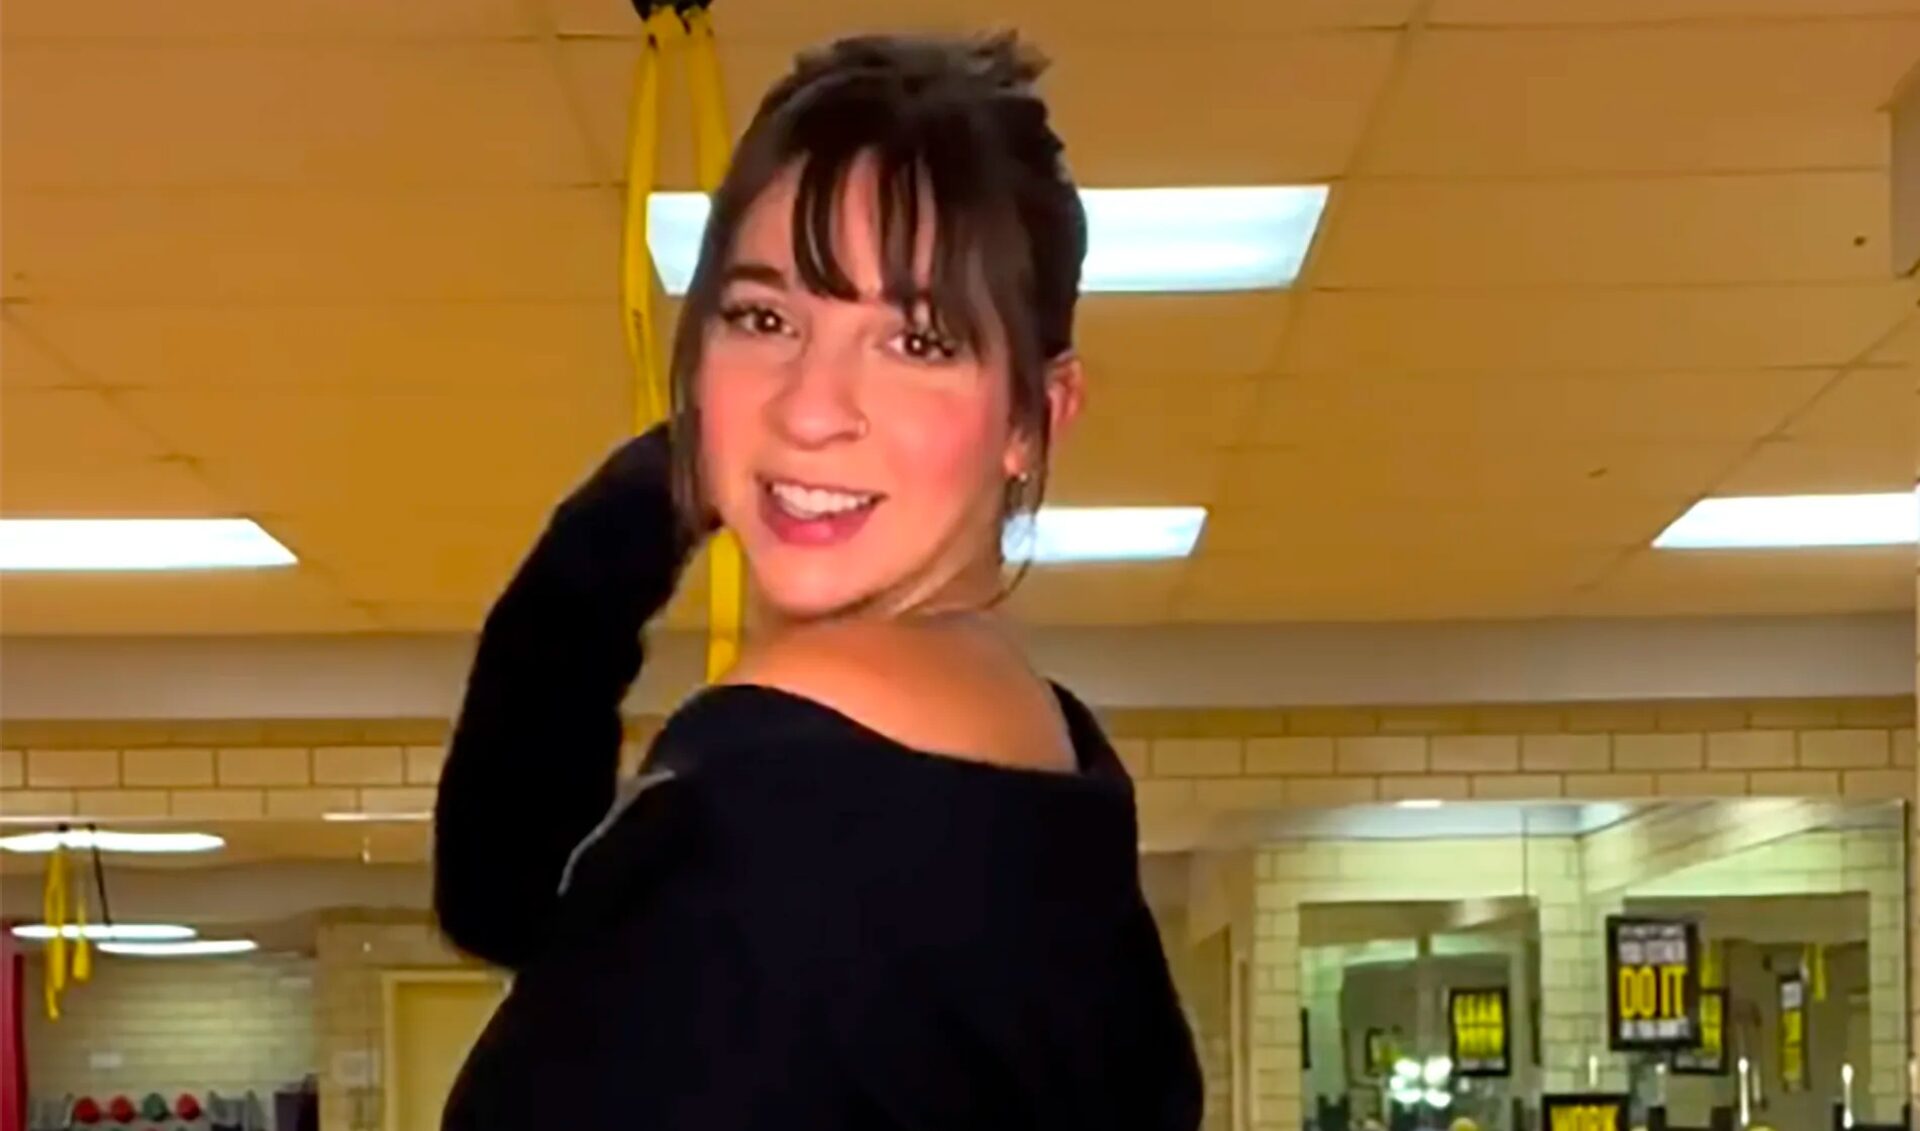 17 months after suffering a mental health crisis, Gabbie Hanna reappears as a YMCA instructor